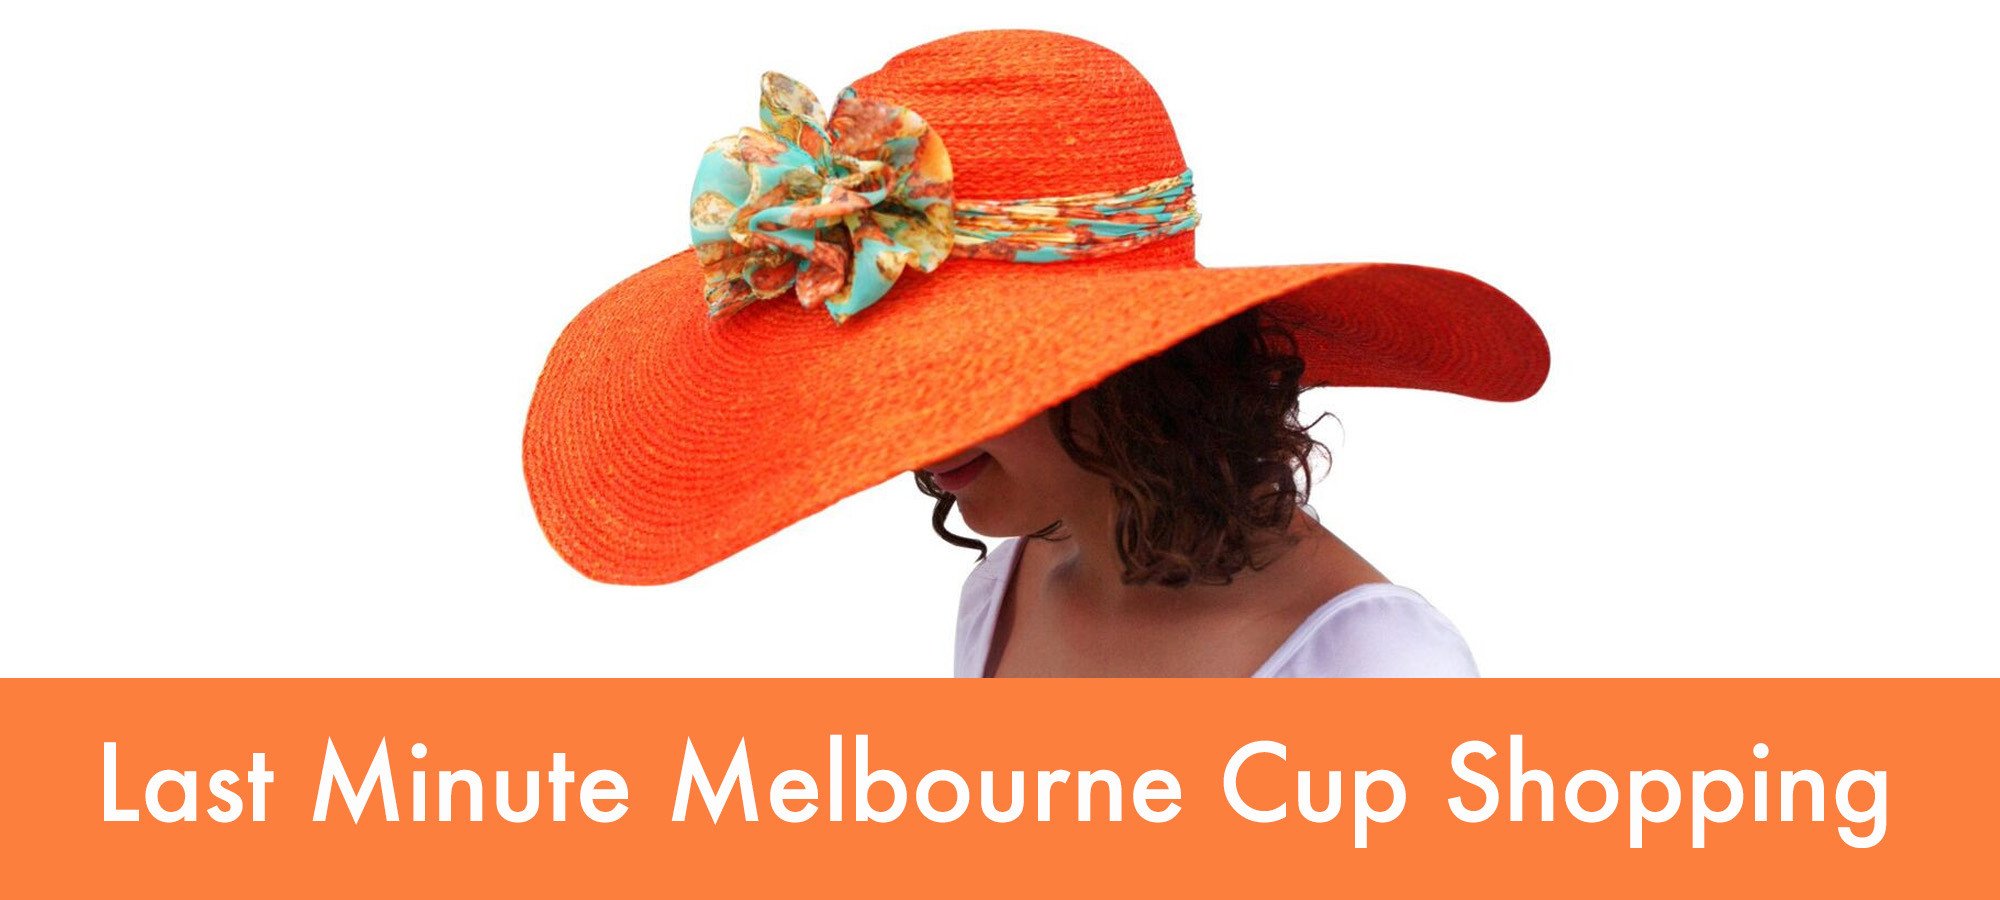 Last minute Melbourne Cup shopping